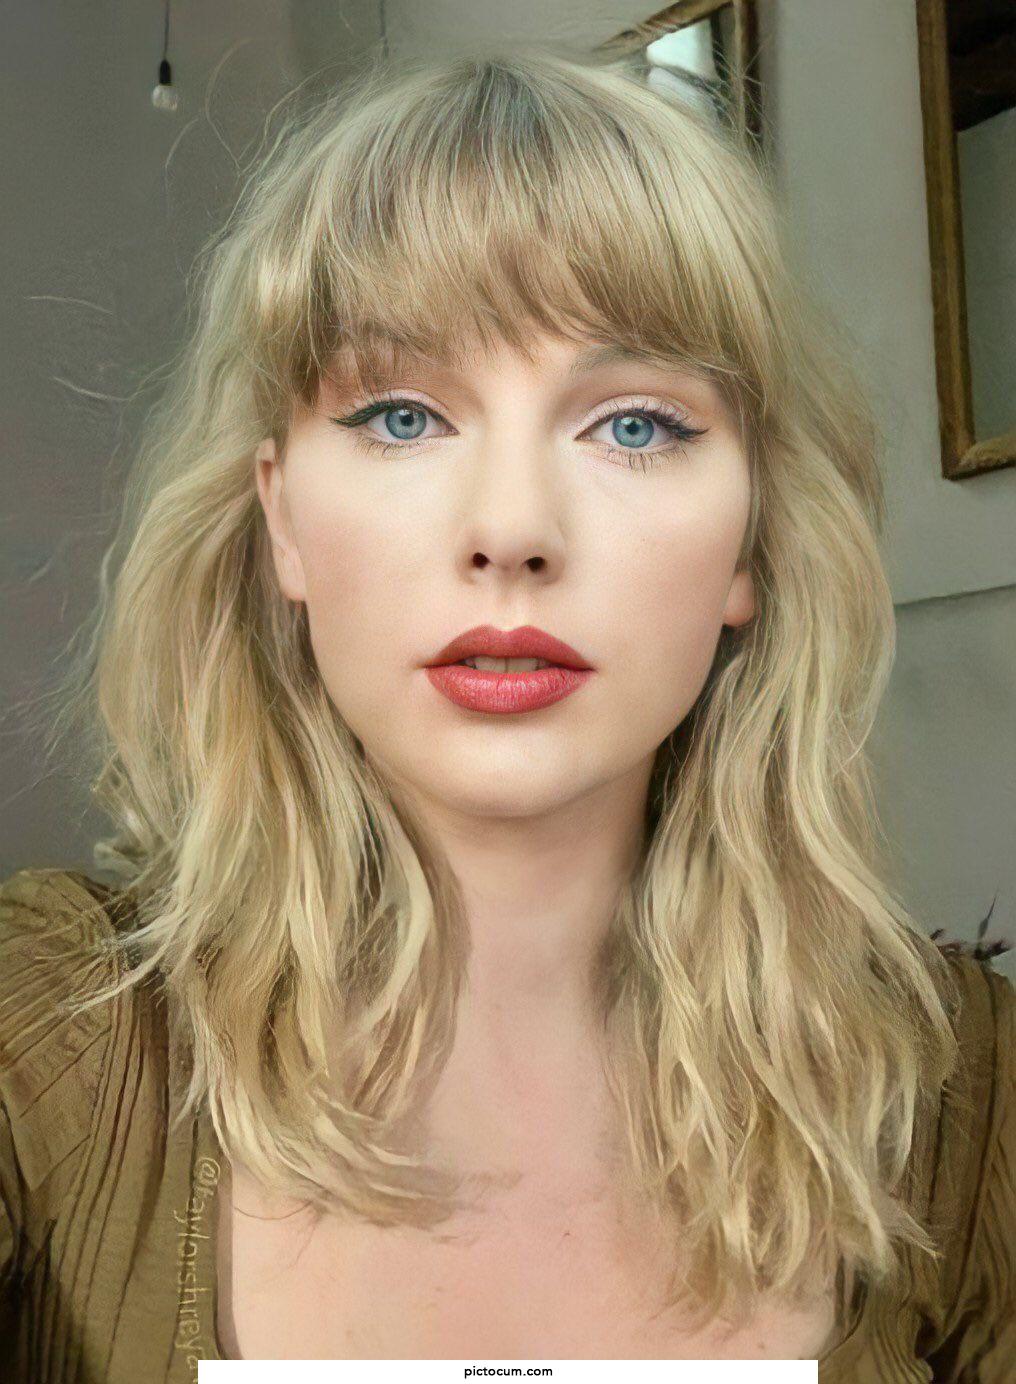 How rough you would facefuck Taylor Swift?